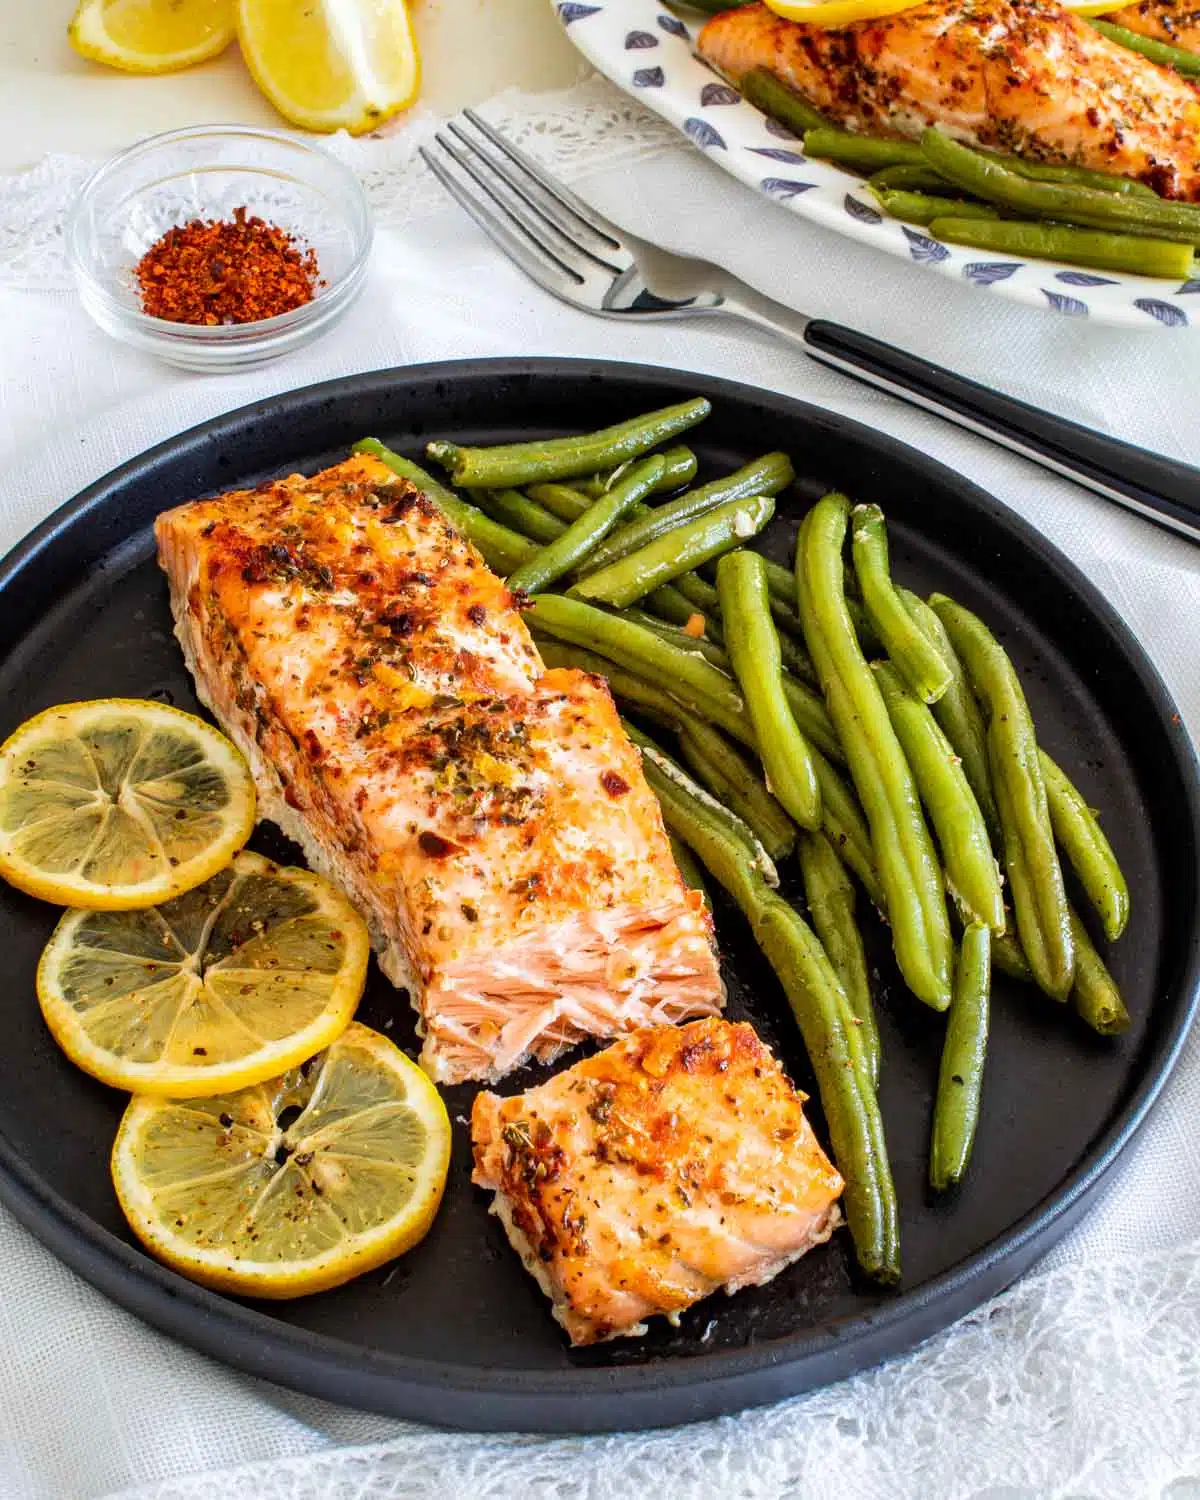 salmon and green beans with a lemon slice on a plate.